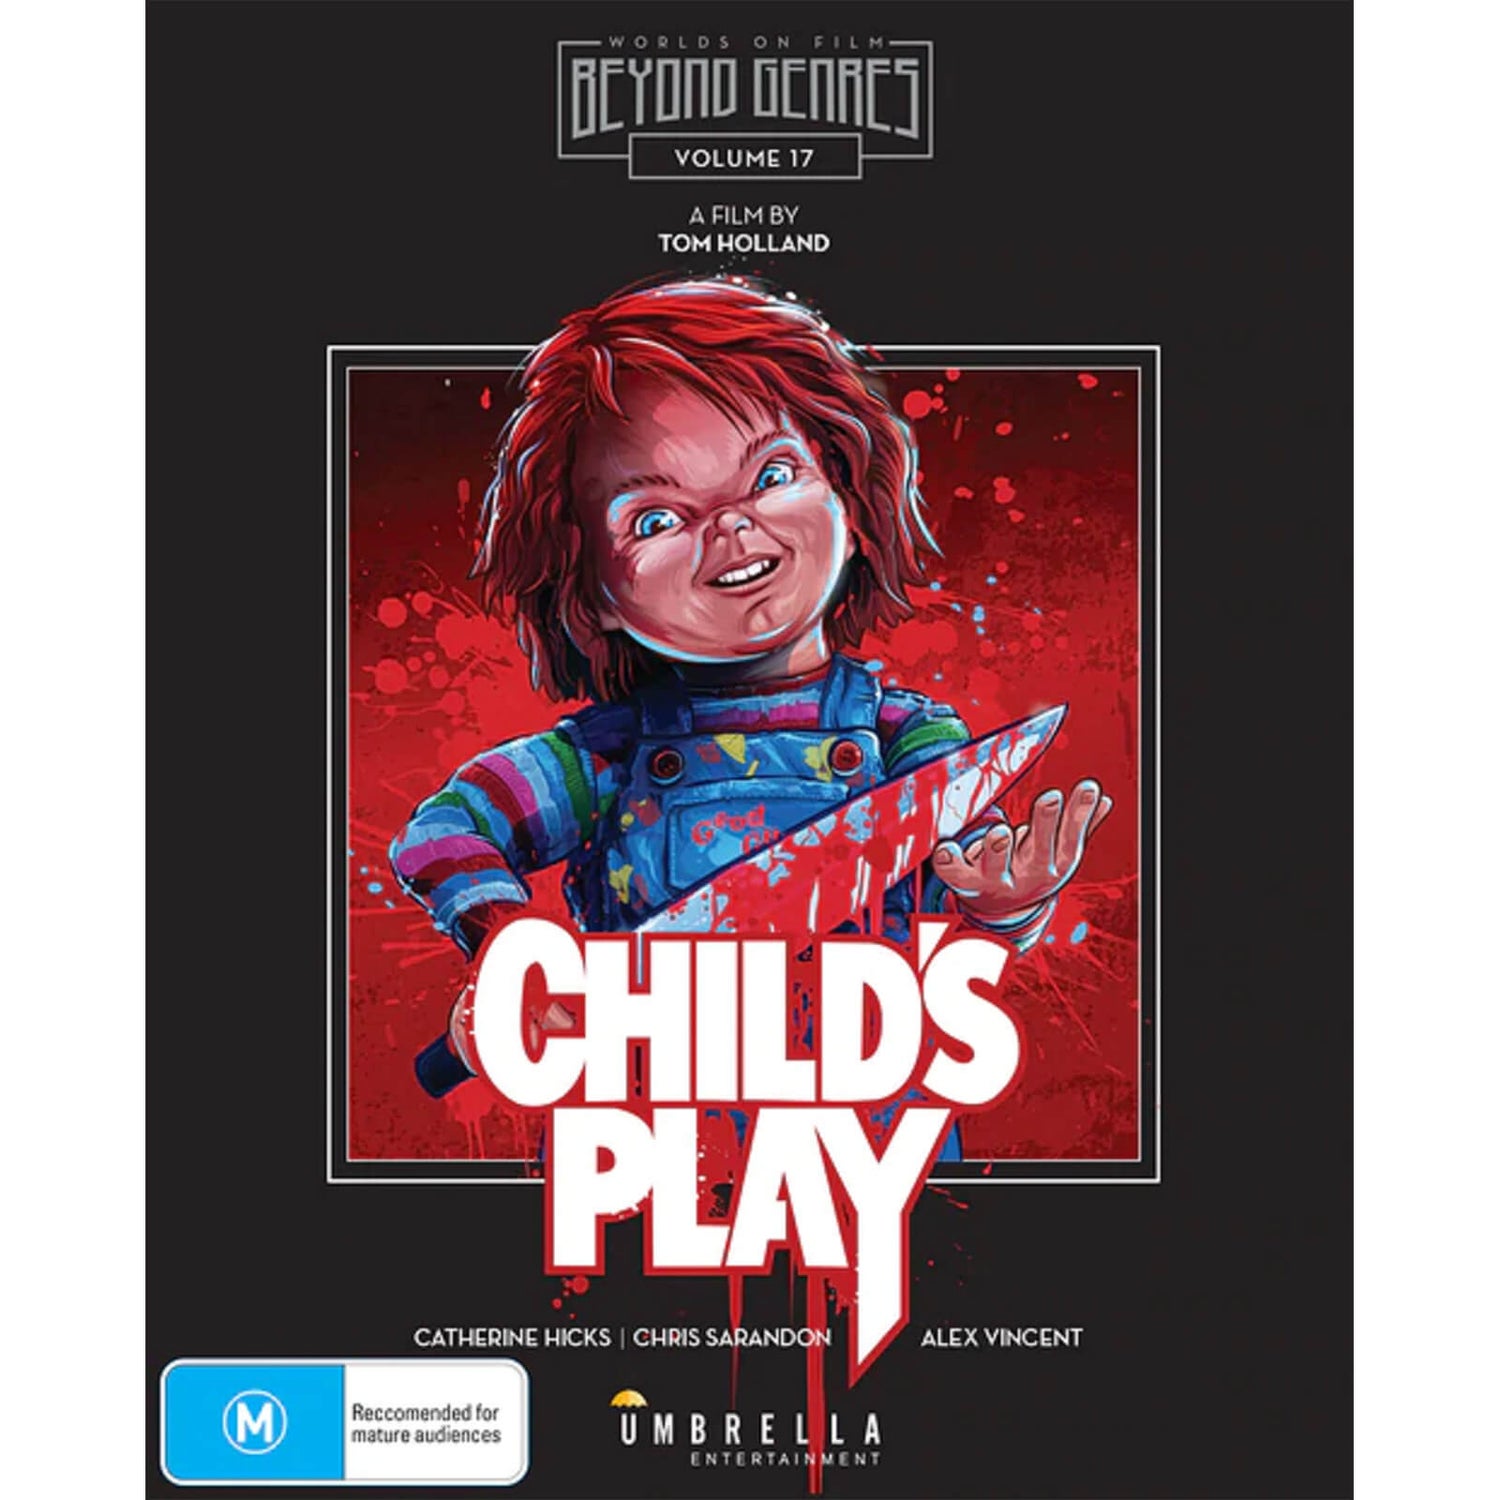 Child's Play - Beyond Genres